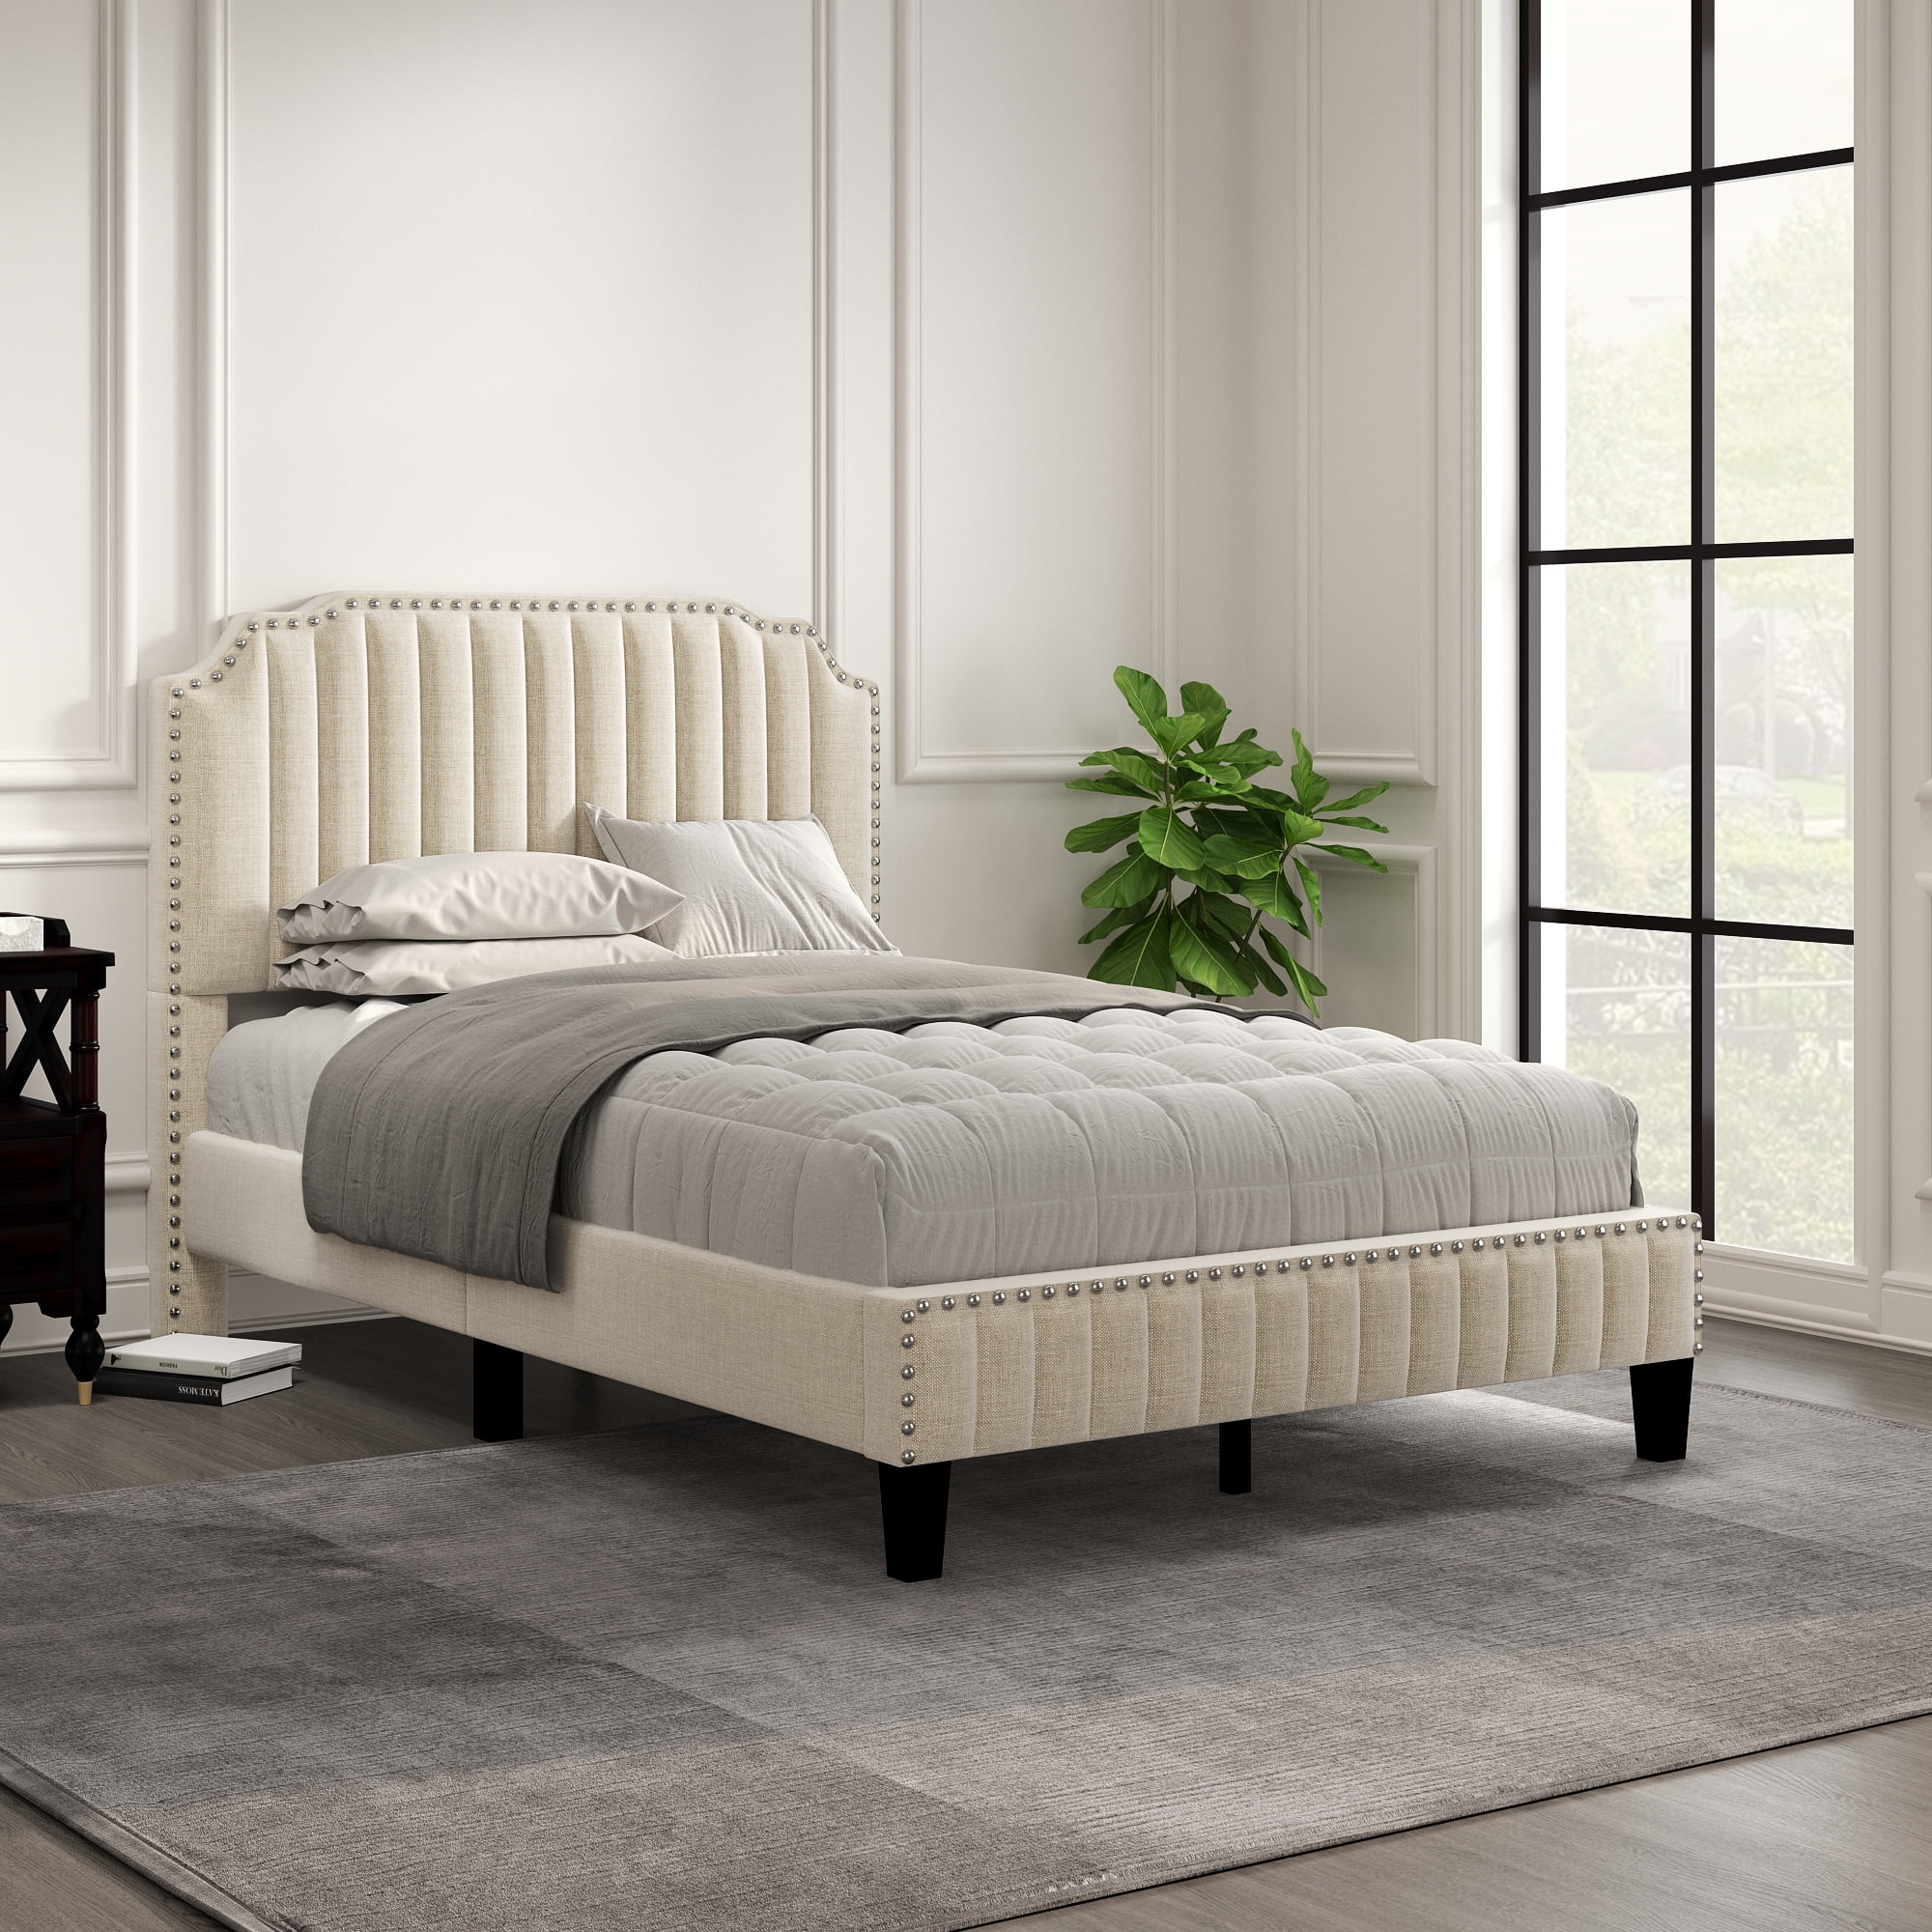 Misverstand zoete smaak jeugd Cream Upholstered Platform Bed, Full Size Bed Frame with Solid Wooden Slat  Support and Curved Upholstered Wingback Headboard, Heavy Duty Full Bed  Mattress Foundation, No Box Spring Required - Walmart.com